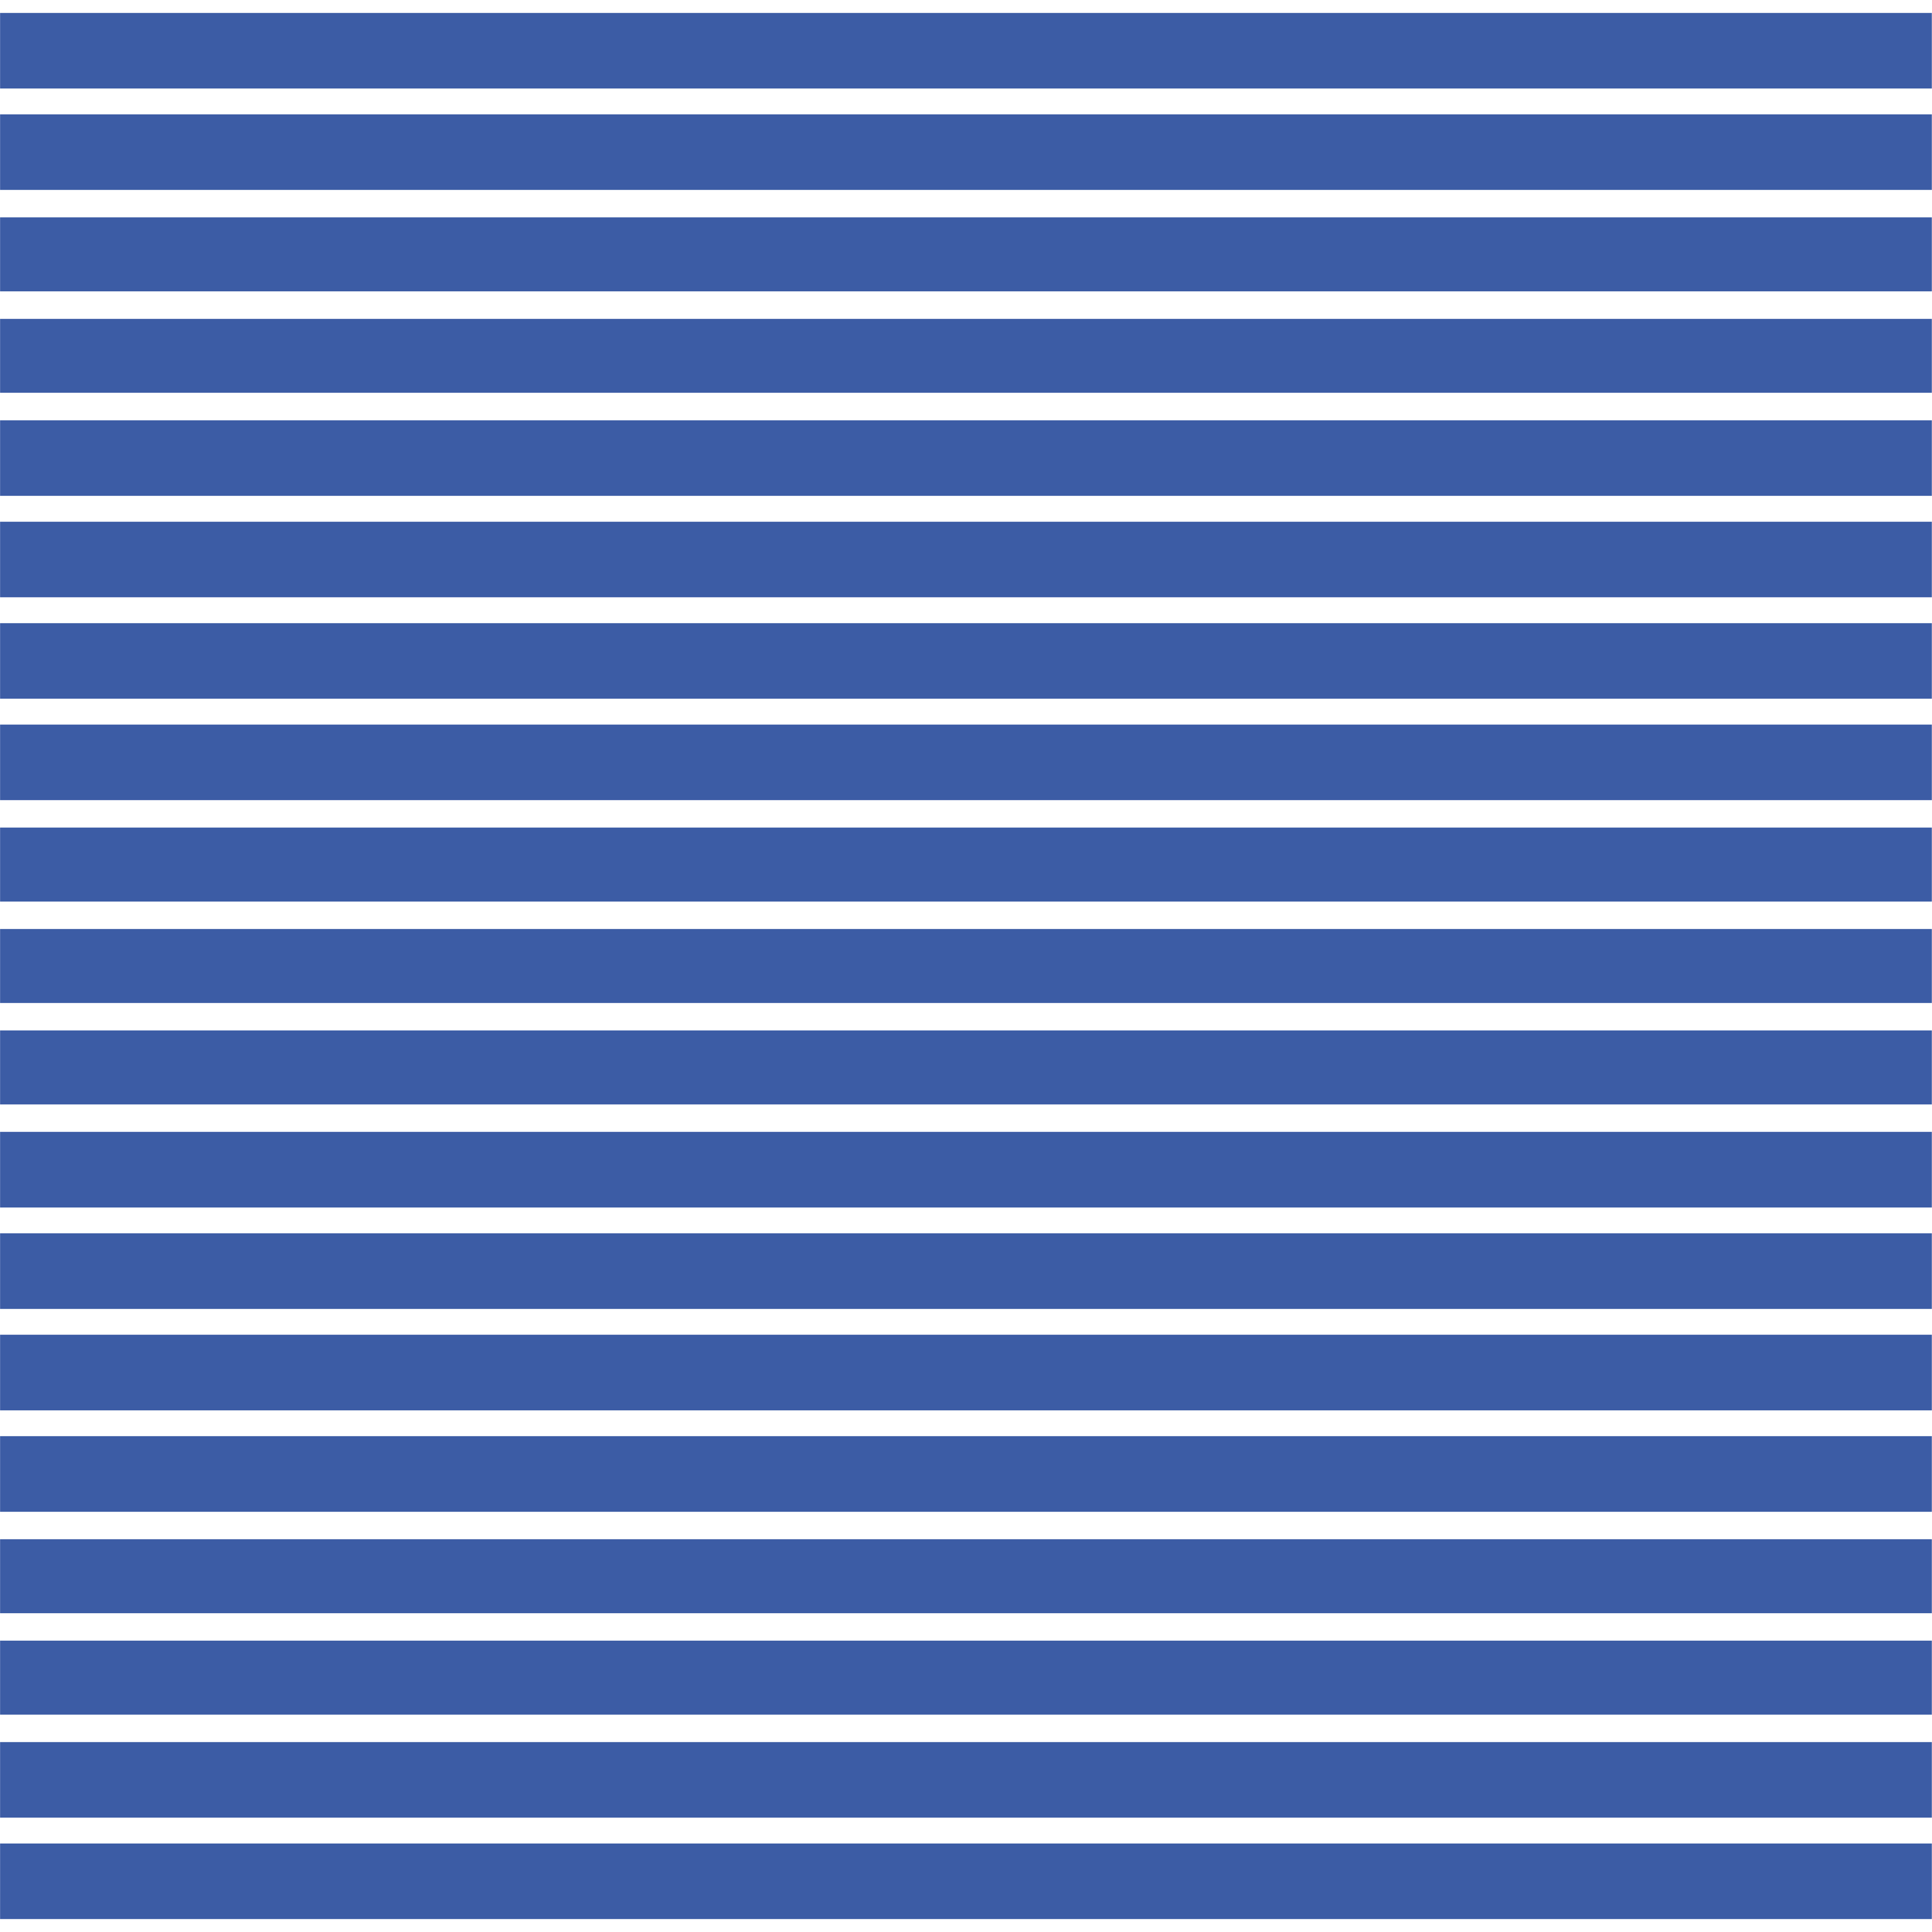 Blue seamless striped pattern vector Download Free Vectors, Clipart